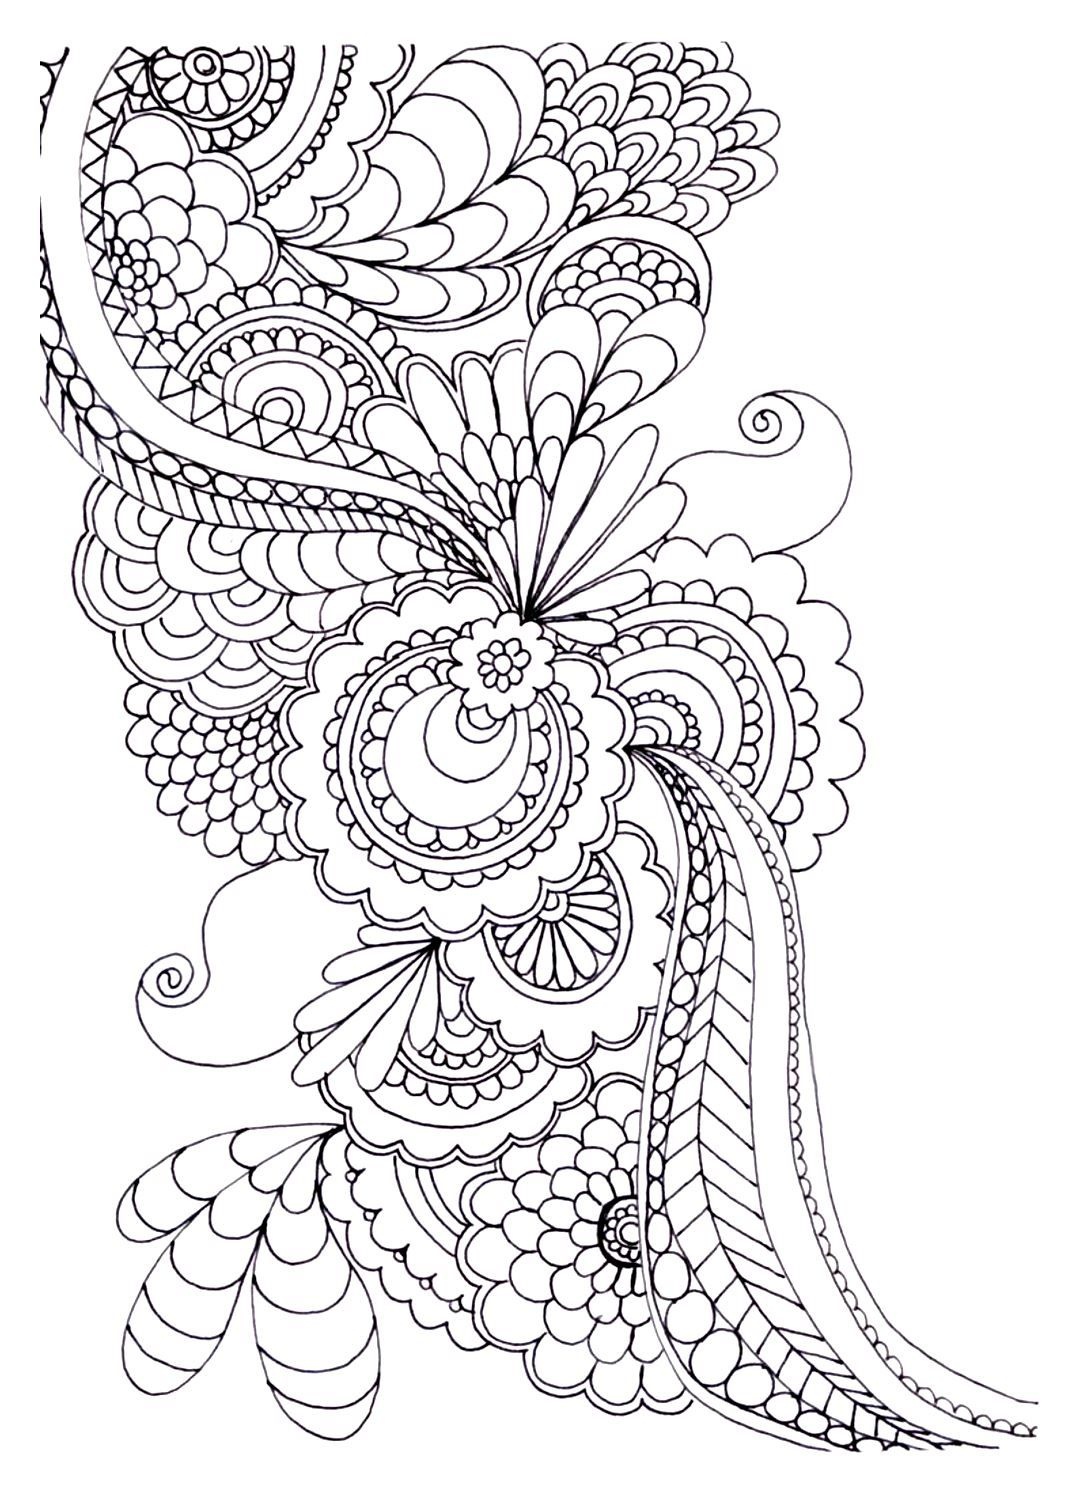 To Print This Free Coloring Page «Coloring-Adult-Zen-Anti-Stress-To - Free Printable Zen Coloring Pages